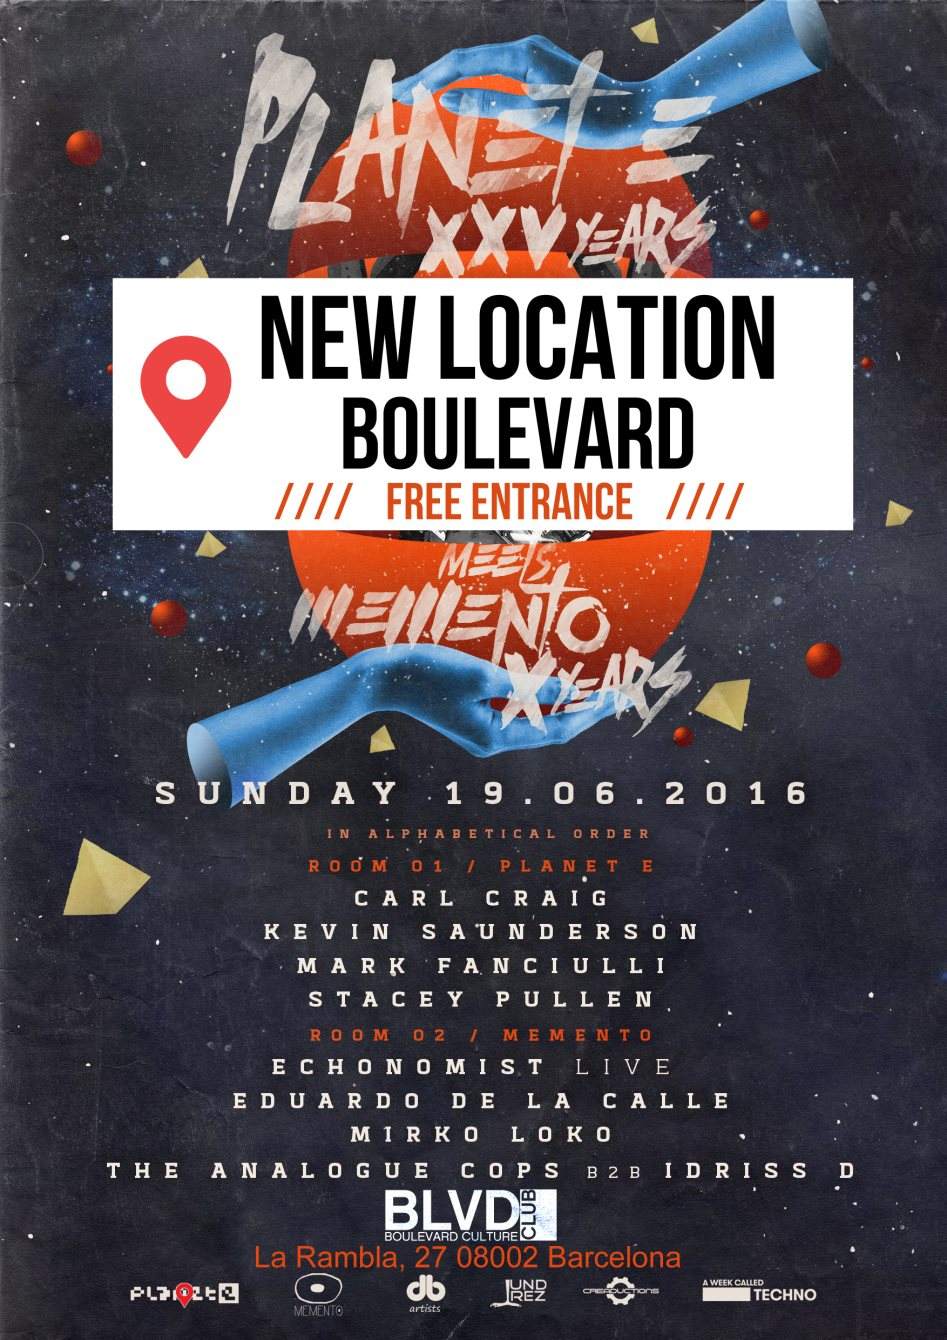 New Location - A Week Called Techno Feat. Planet E XXV Years Meets X Years Memento - フライヤー表